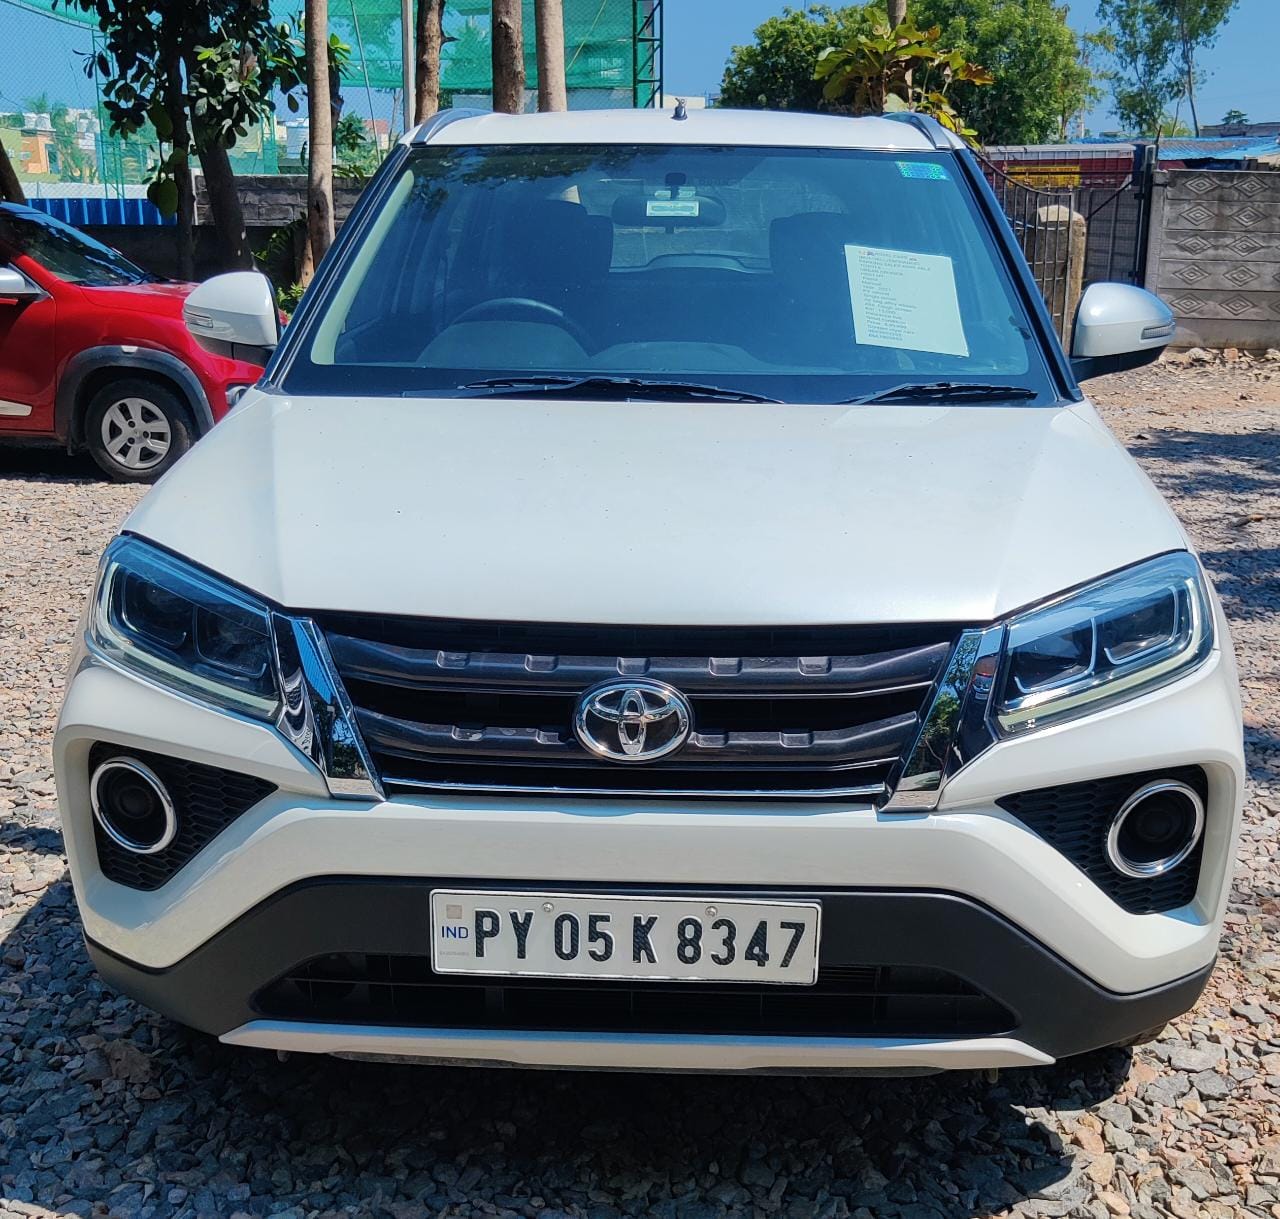 6944-for-sale-Toyota-Urban-Cruiser-Petrol-First-Owner-2021-PY-registered-rs-899999